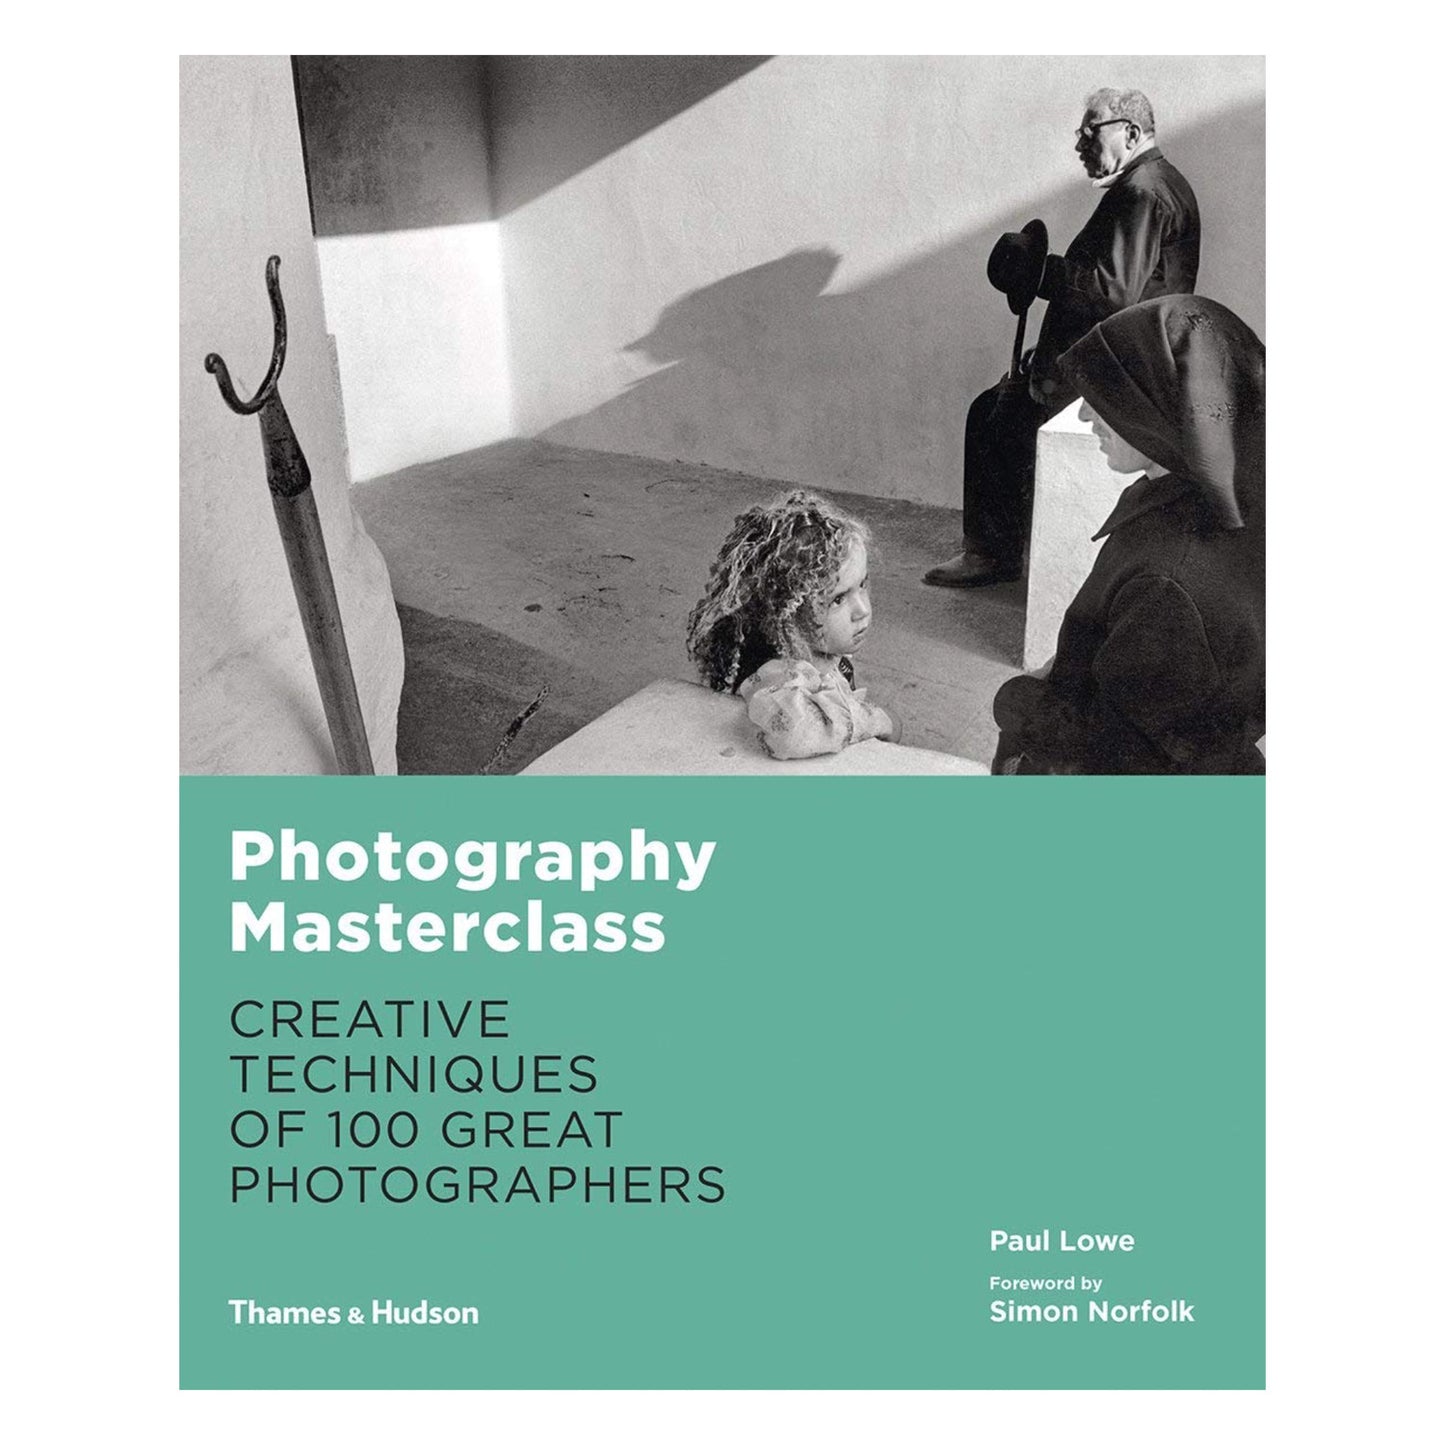 Photography Masterclass: Creative Techniques of 100 Great Photographers by Paul Lowe and Simon Norfolk Photo Museum Ireland